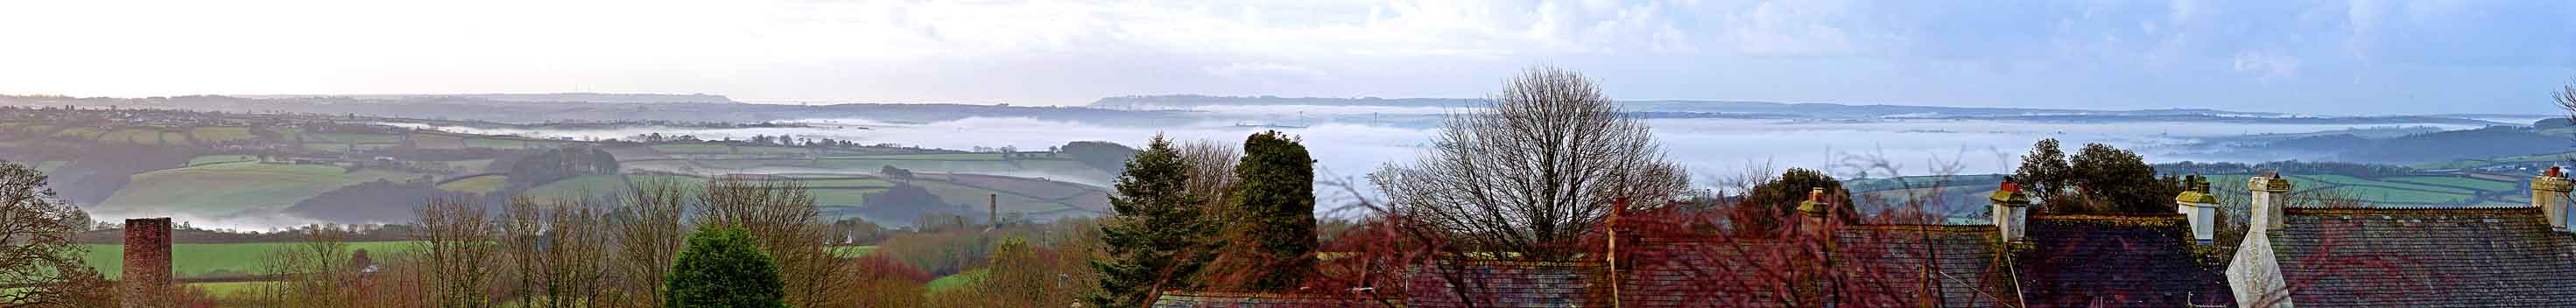 Tamar Valley, looking south from High View, Delaware, Gunnislake